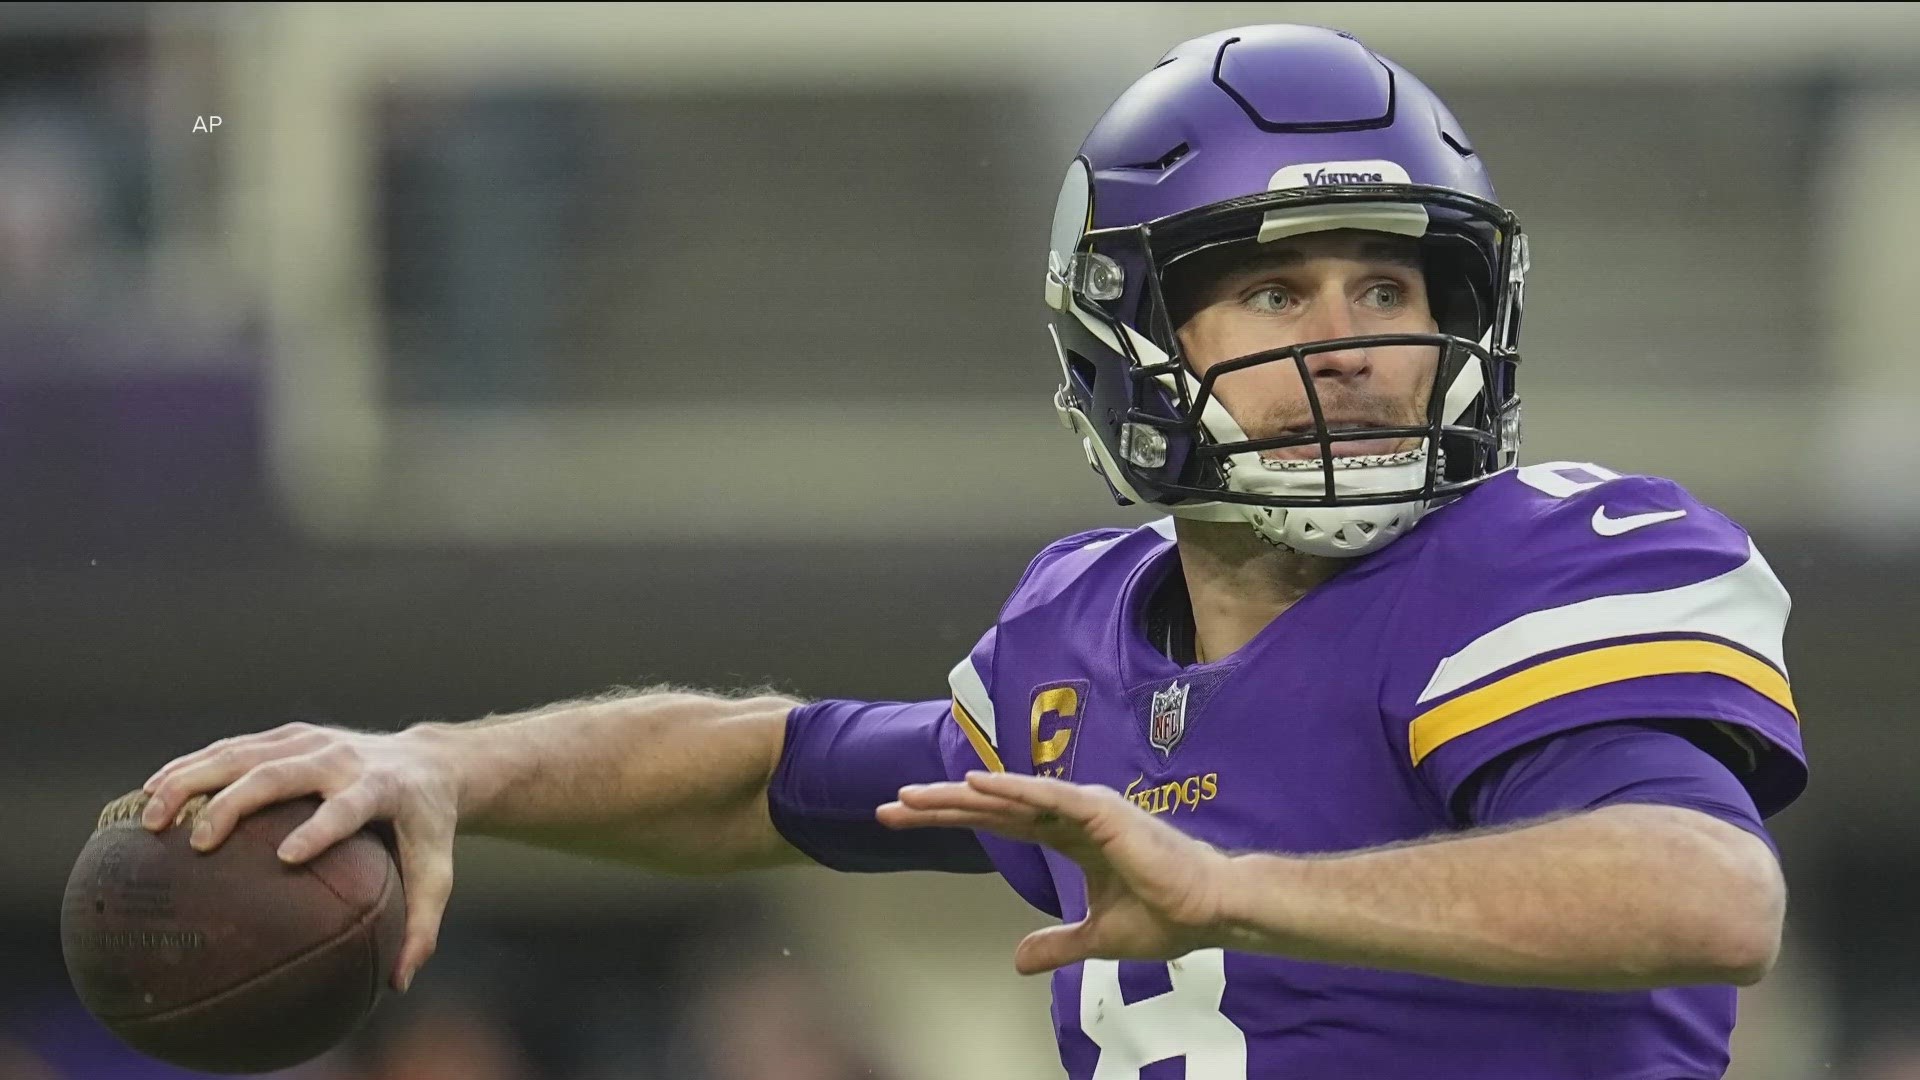 Vikings-49ers live stream (11/28): How to watch online, TV, time - al.com